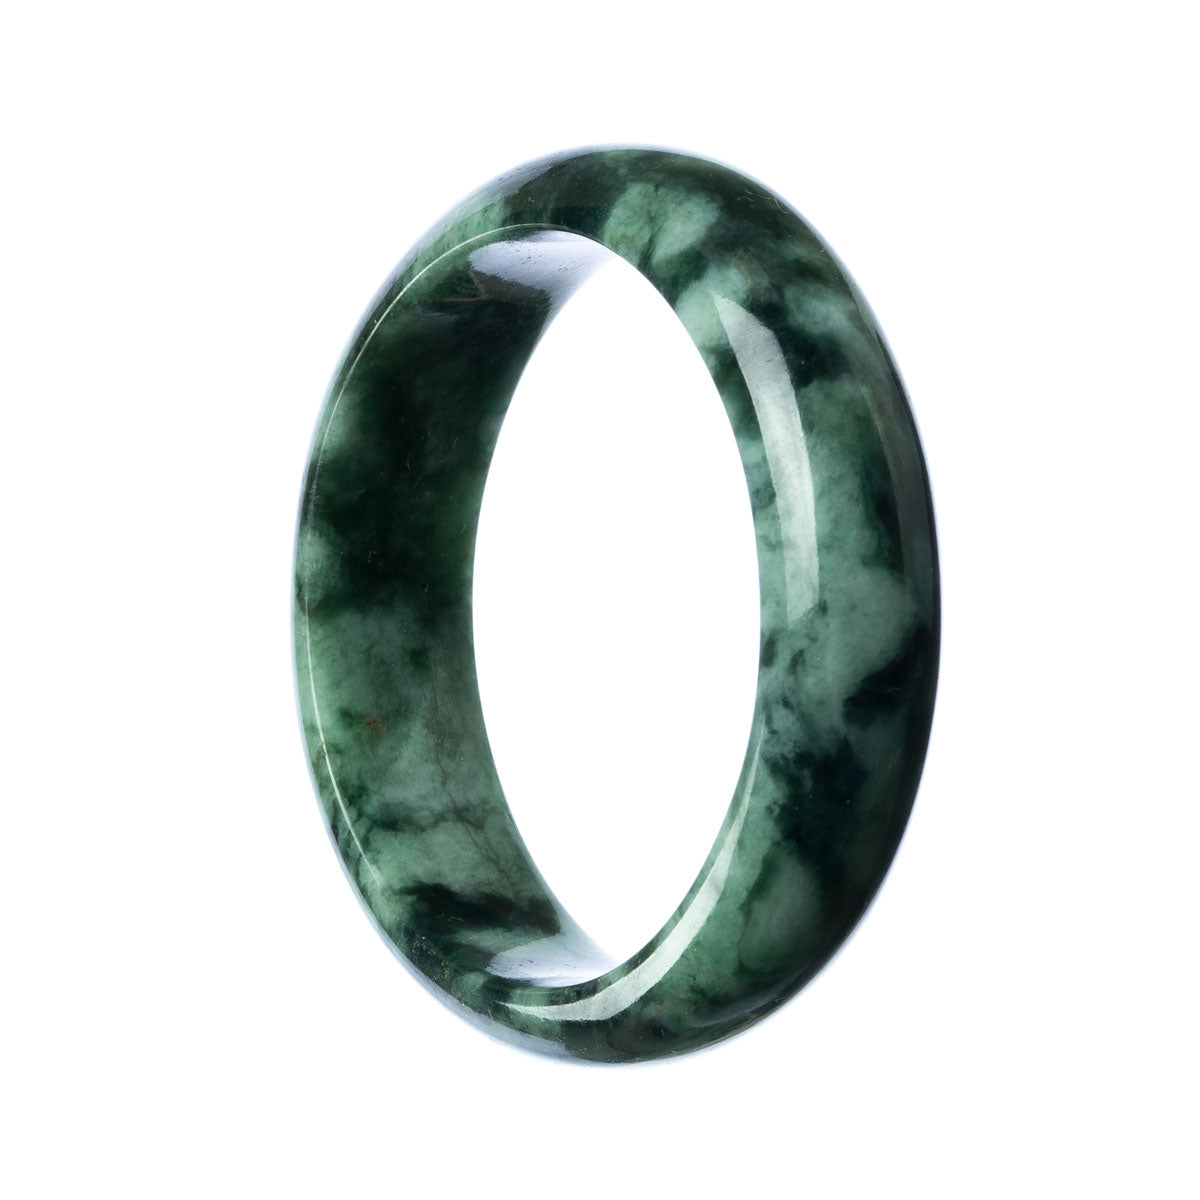 A close-up photo of a stunning green jade bangle bracelet, made from high-quality Grade A green jadeite jade. The bracelet is in a 58mm half moon shape and is beautifully crafted. The jadeite jade has a rich green color and a smooth, polished surface. This exquisite piece of jewelry from MAYS is a true treasure.